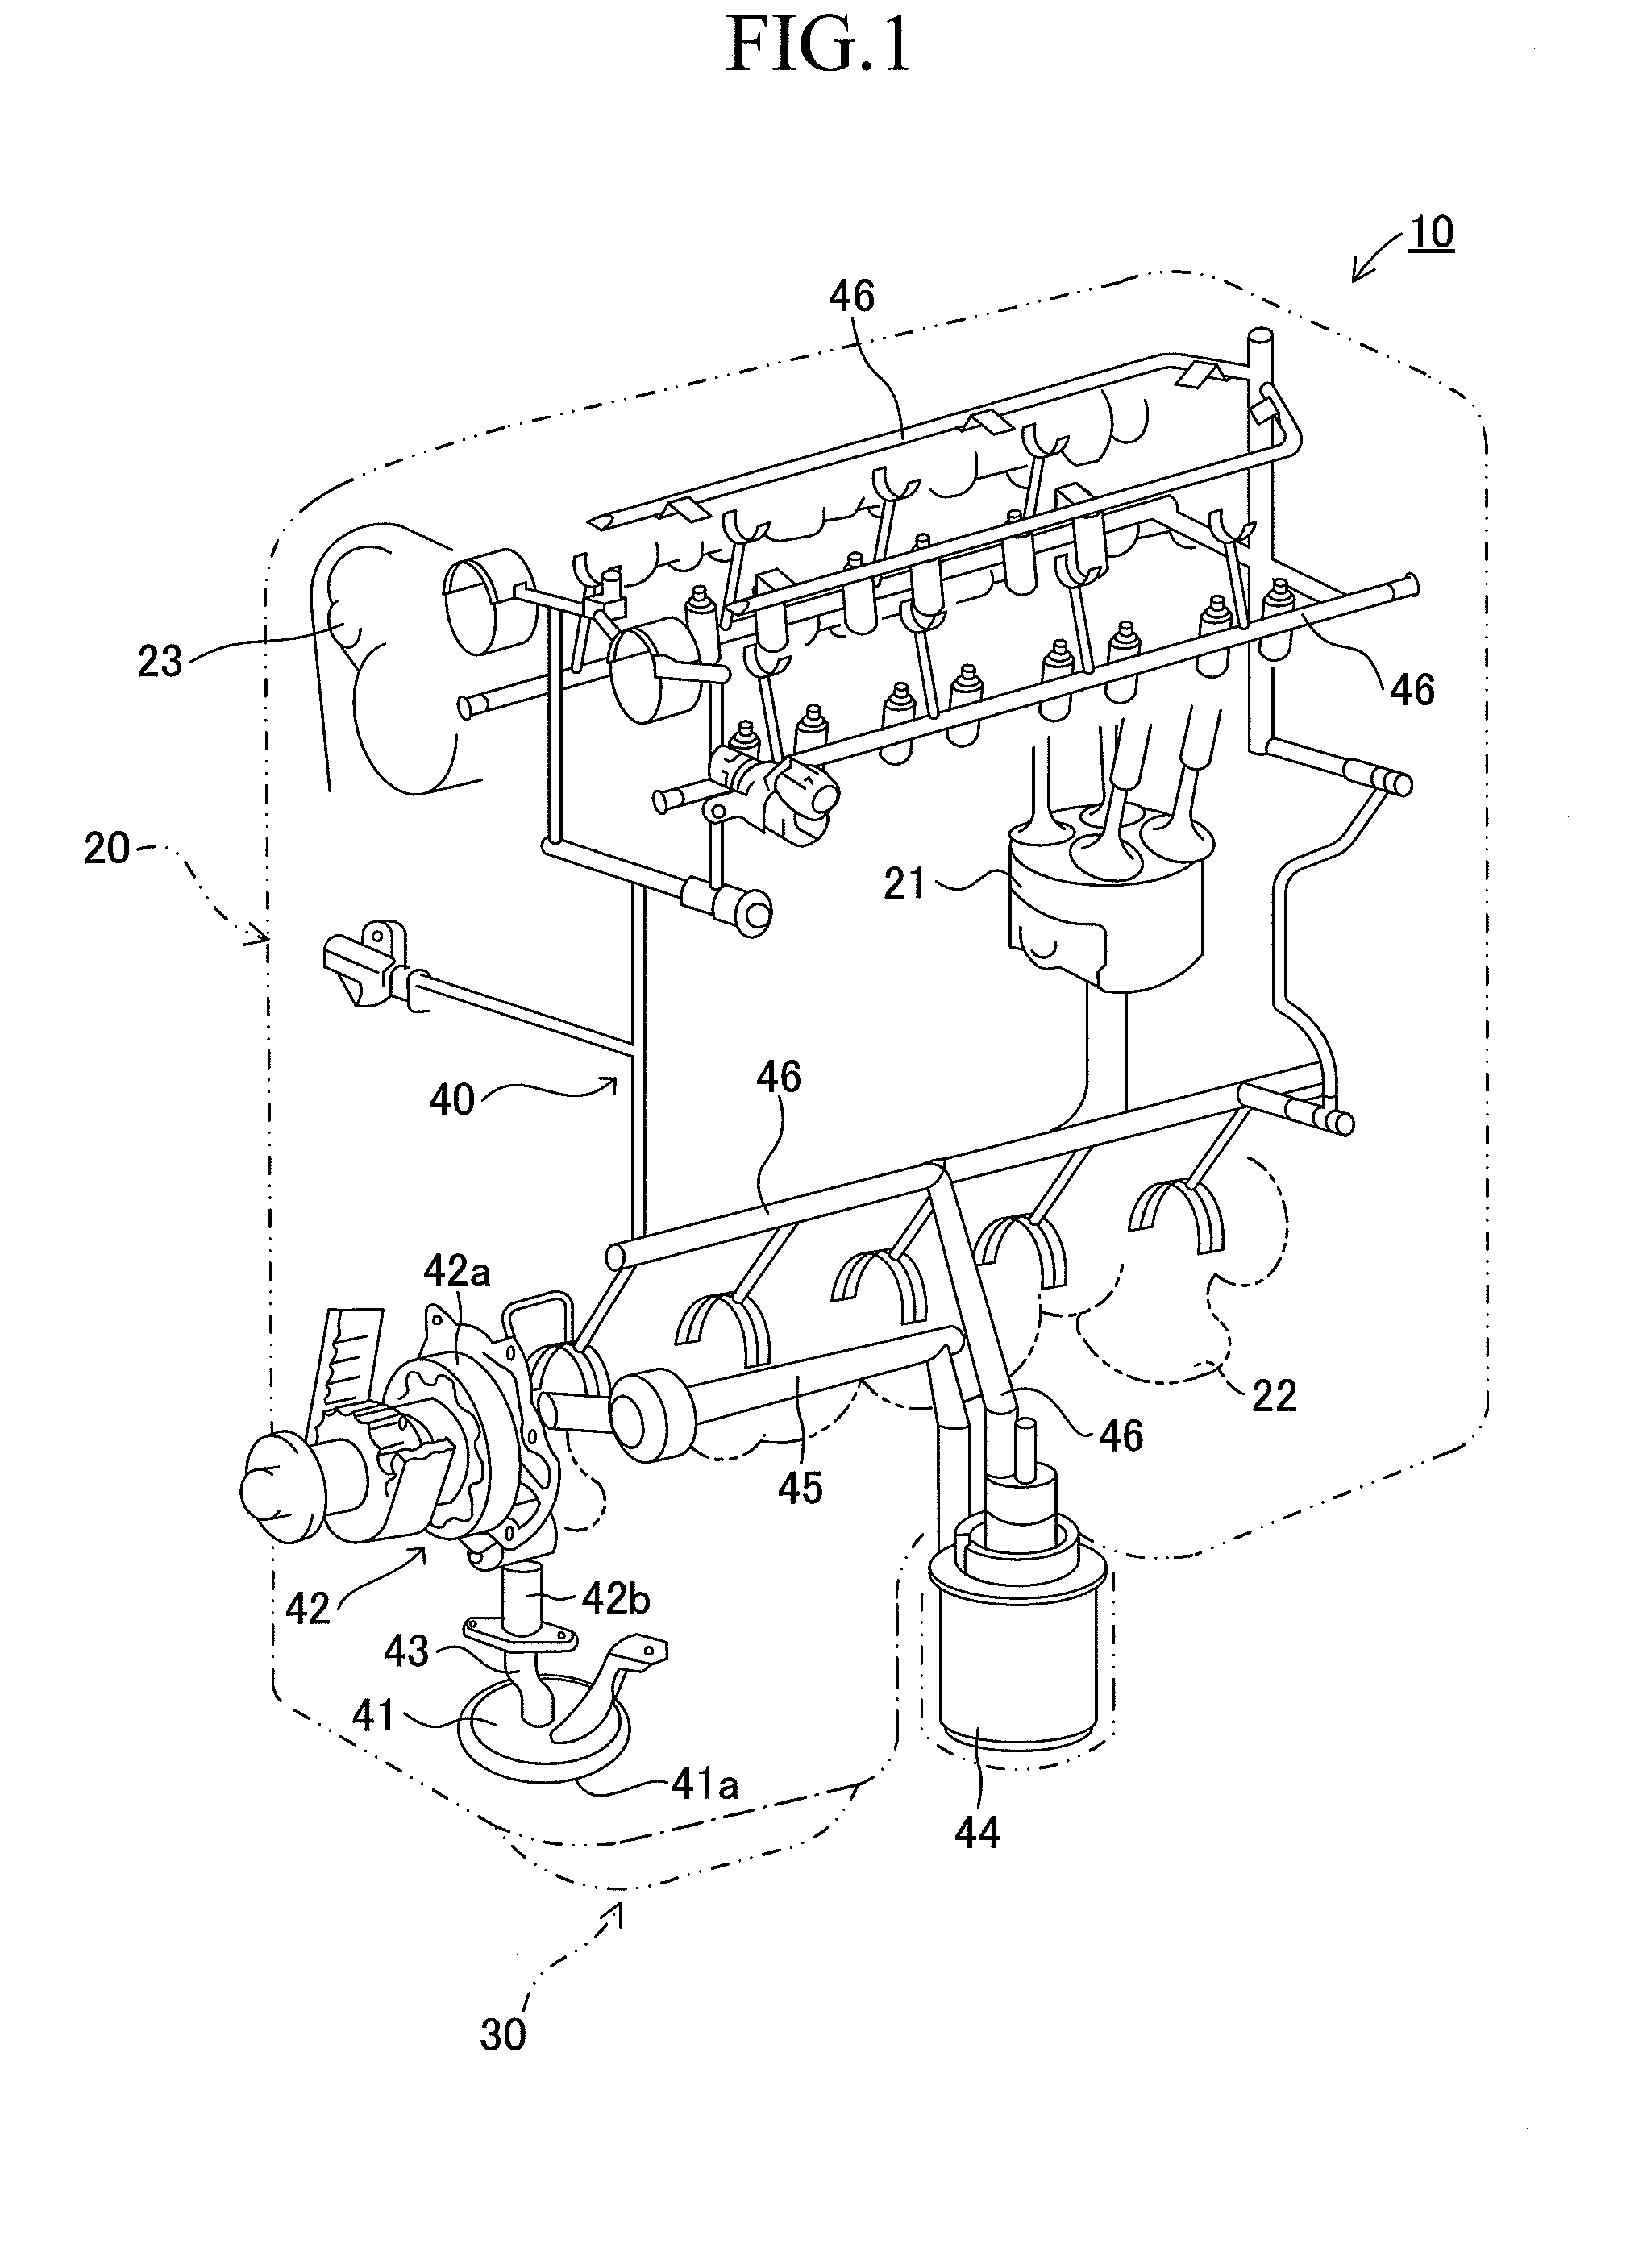 Lubrication device and oil pan